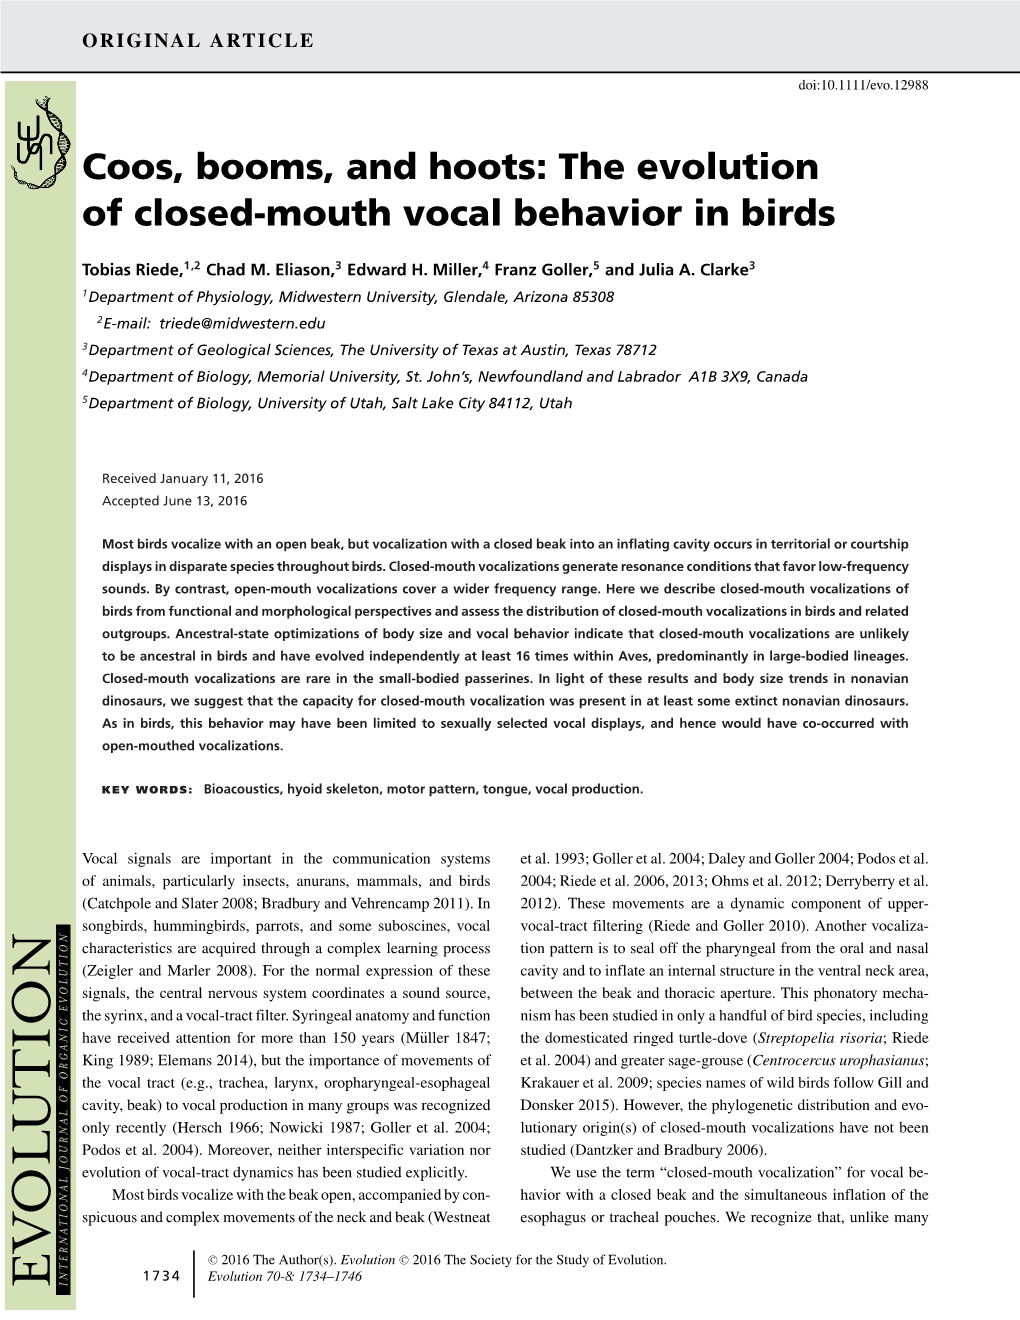 The Evolution of Closed-Mouth Vocal Behavior in Birds